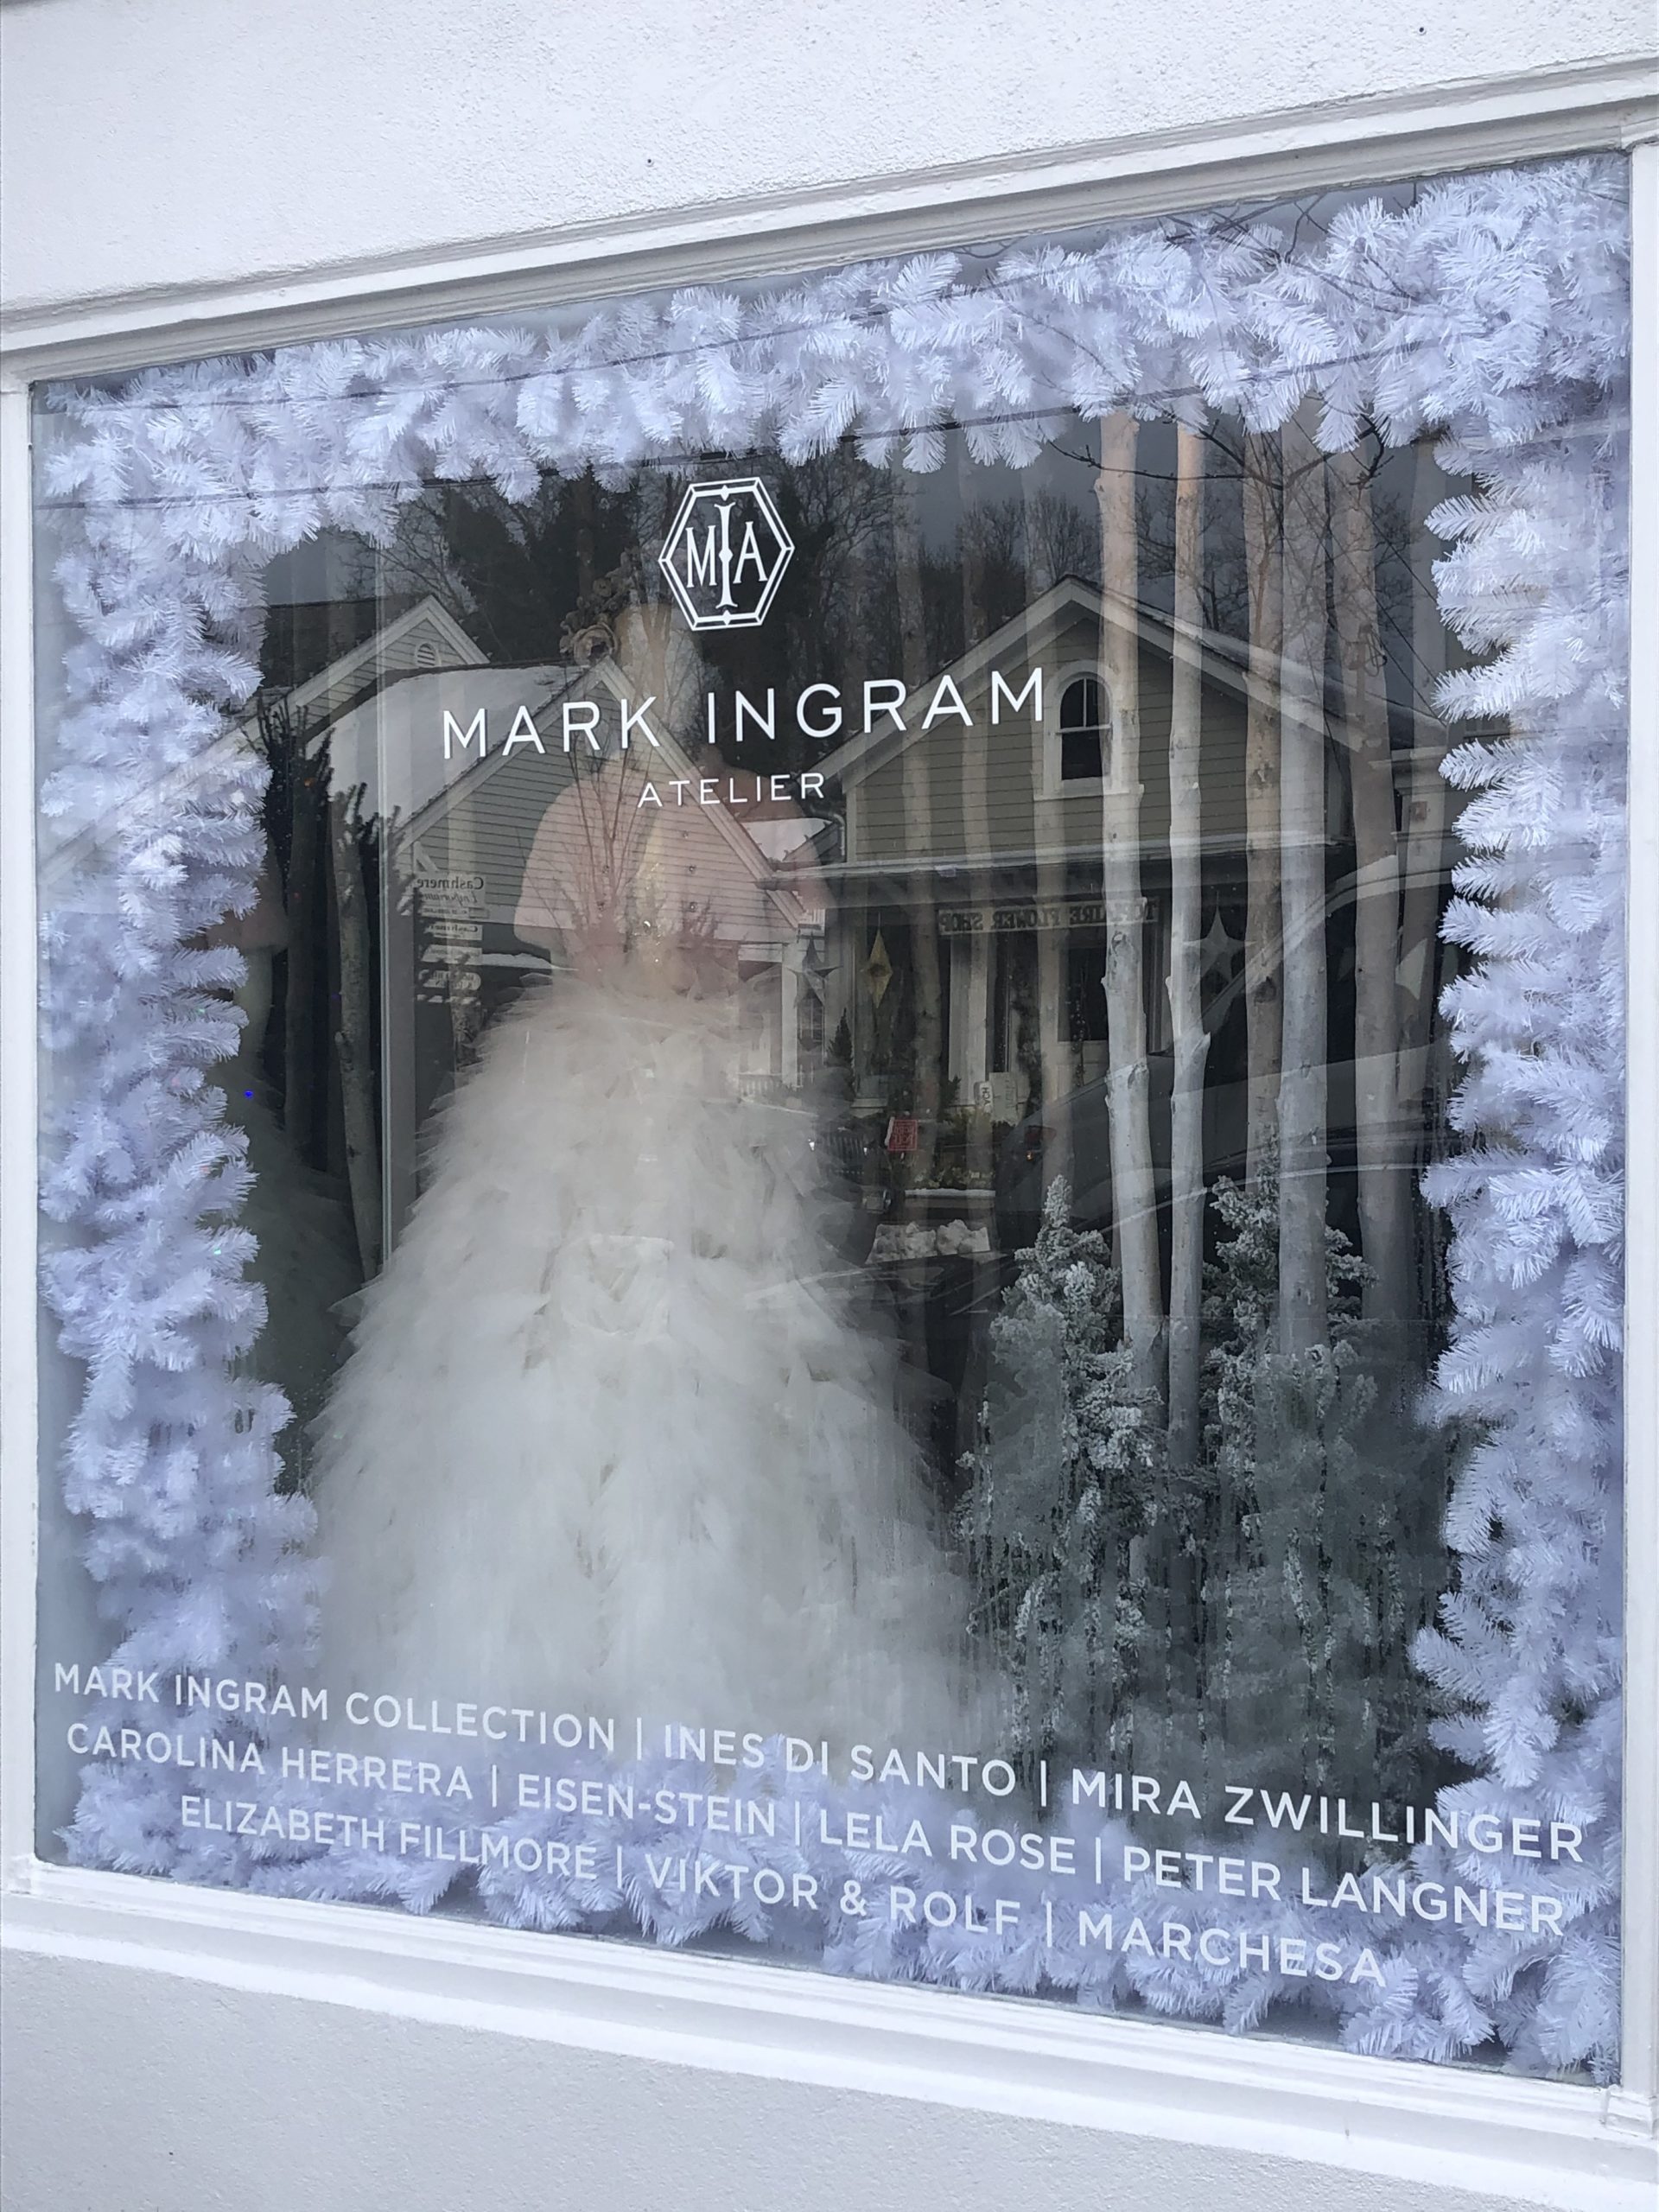 Mark Ingram Atelier took first place for window display in the Southampton Village Holiday Window Contest, followed by Topaire and Therapy. Italian restaurant Saint Ambreous won a building-only category in the annual